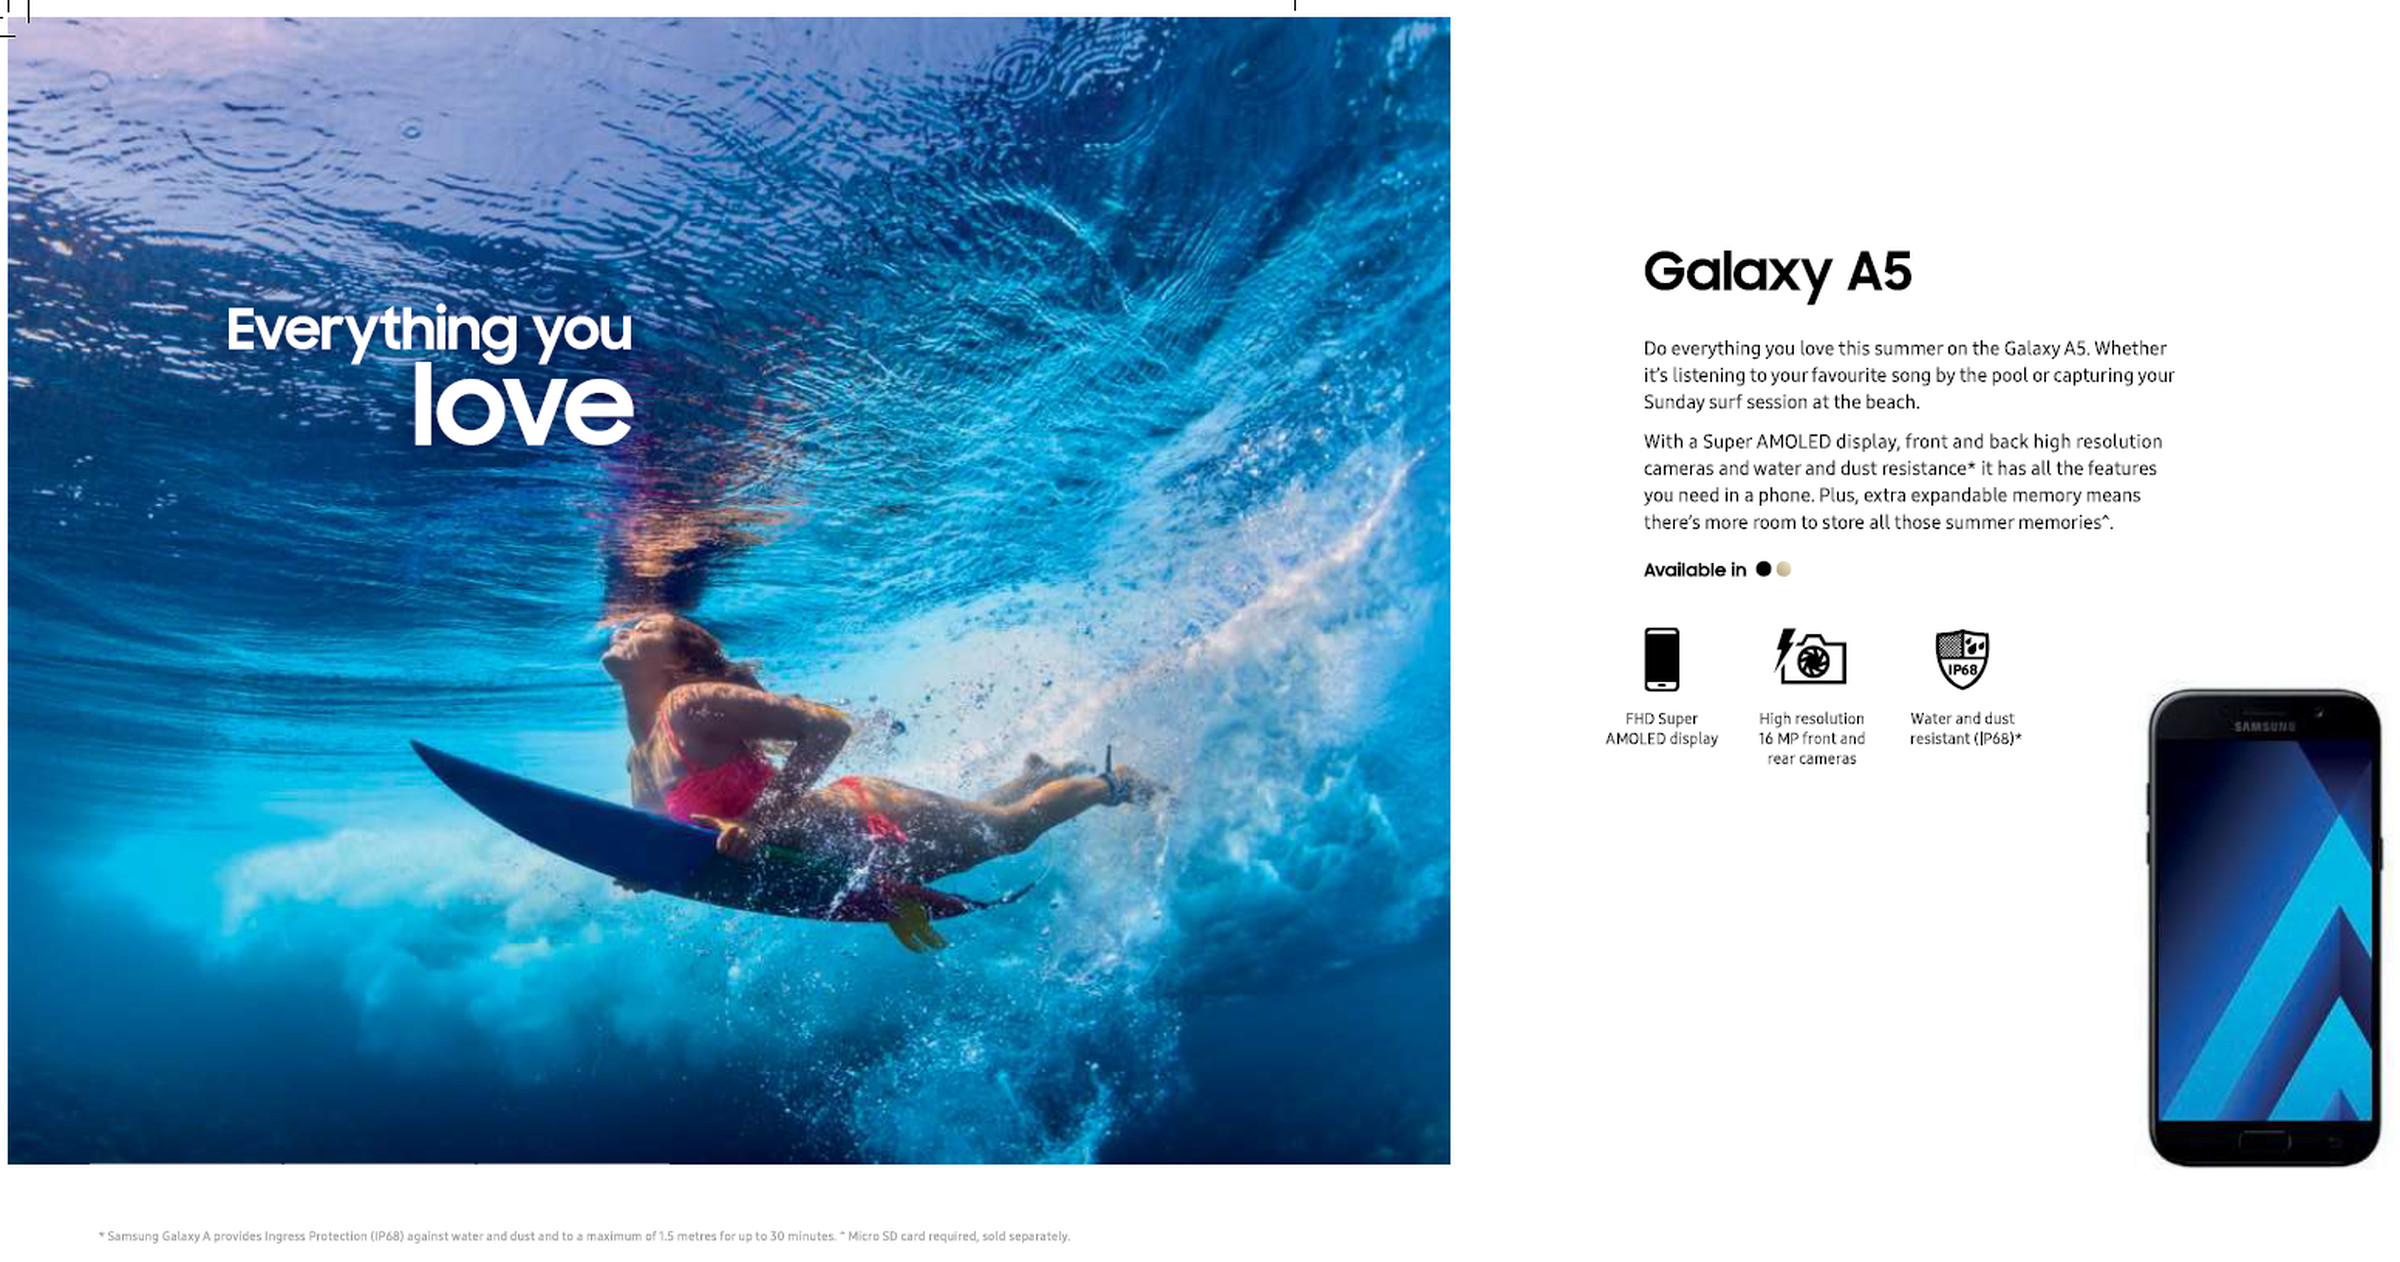 Samsung’s ads implied that it’s okay to take your phone surfing. It is not advisable to take your phone surfing.